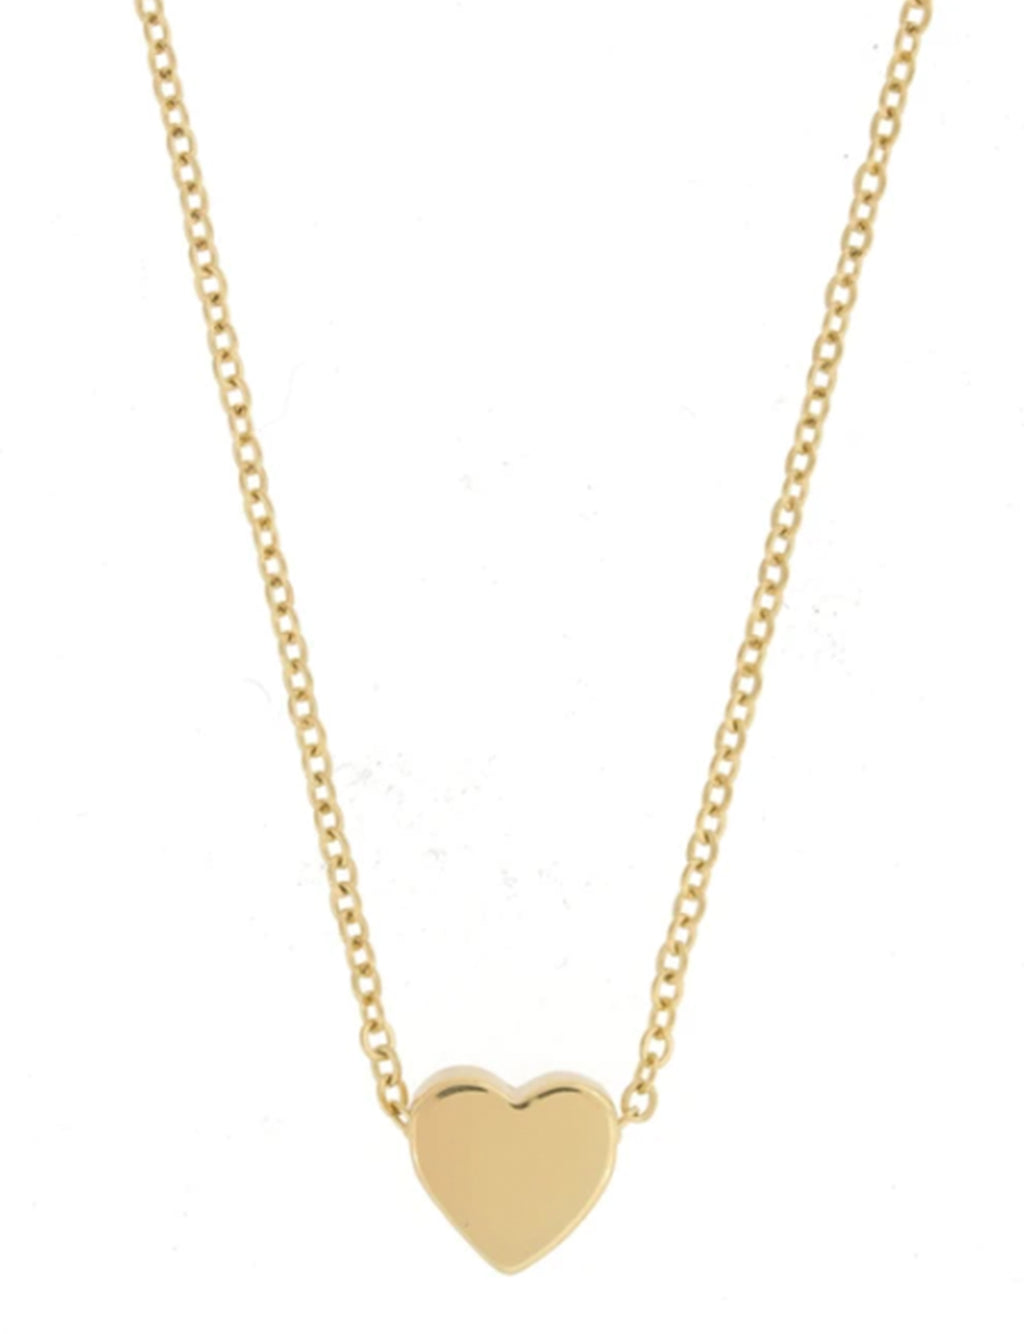 Mini Heart Necklace, Gold Plated